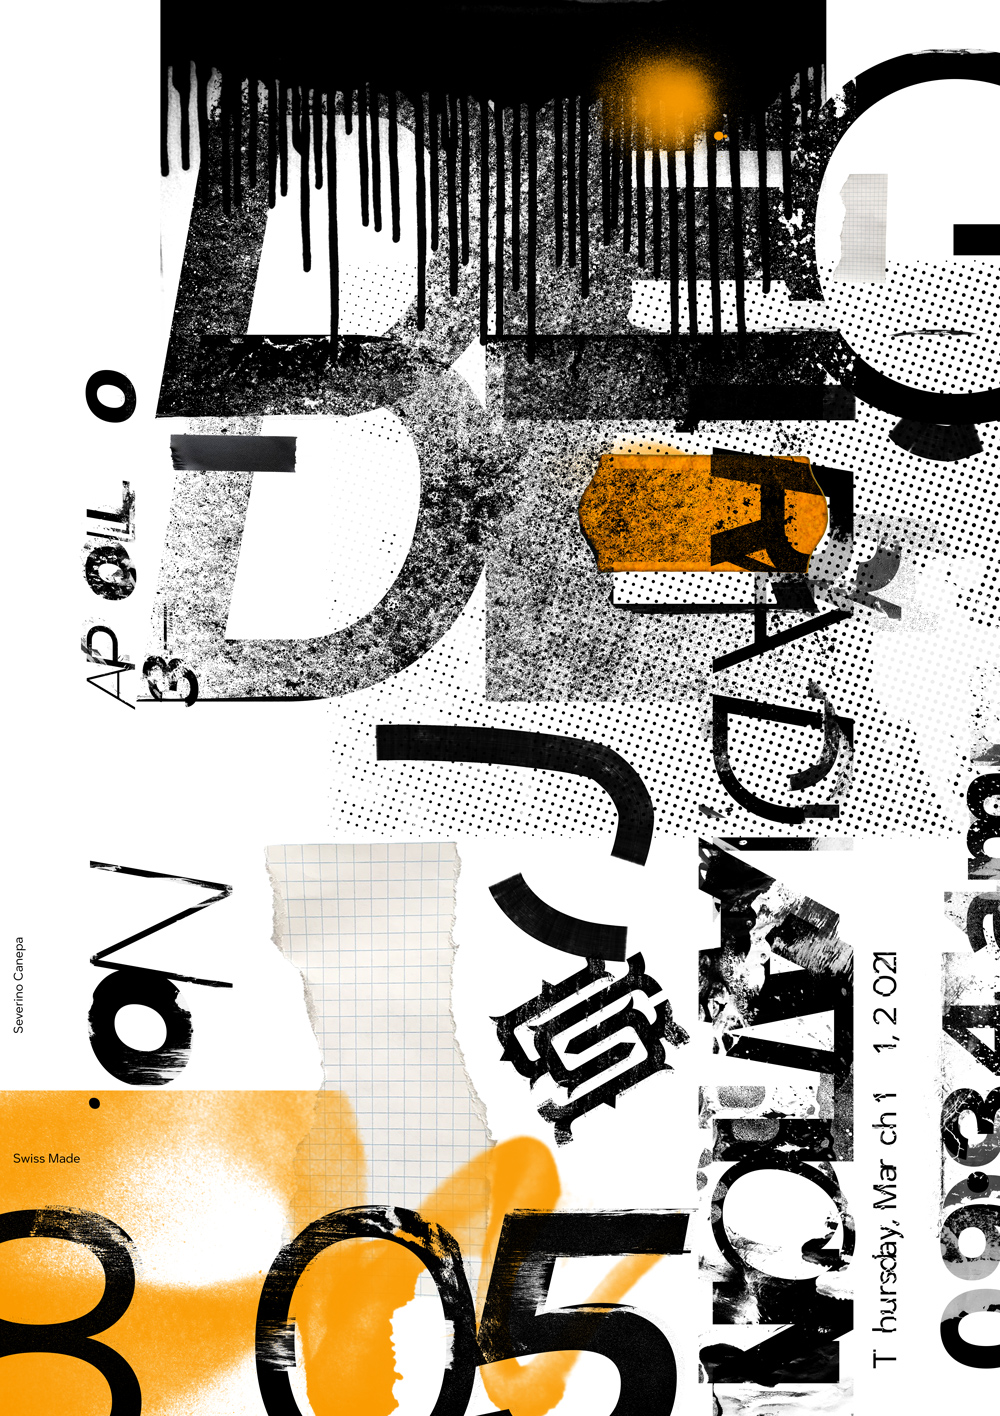 Design made with typographic degration on a minimalist layout